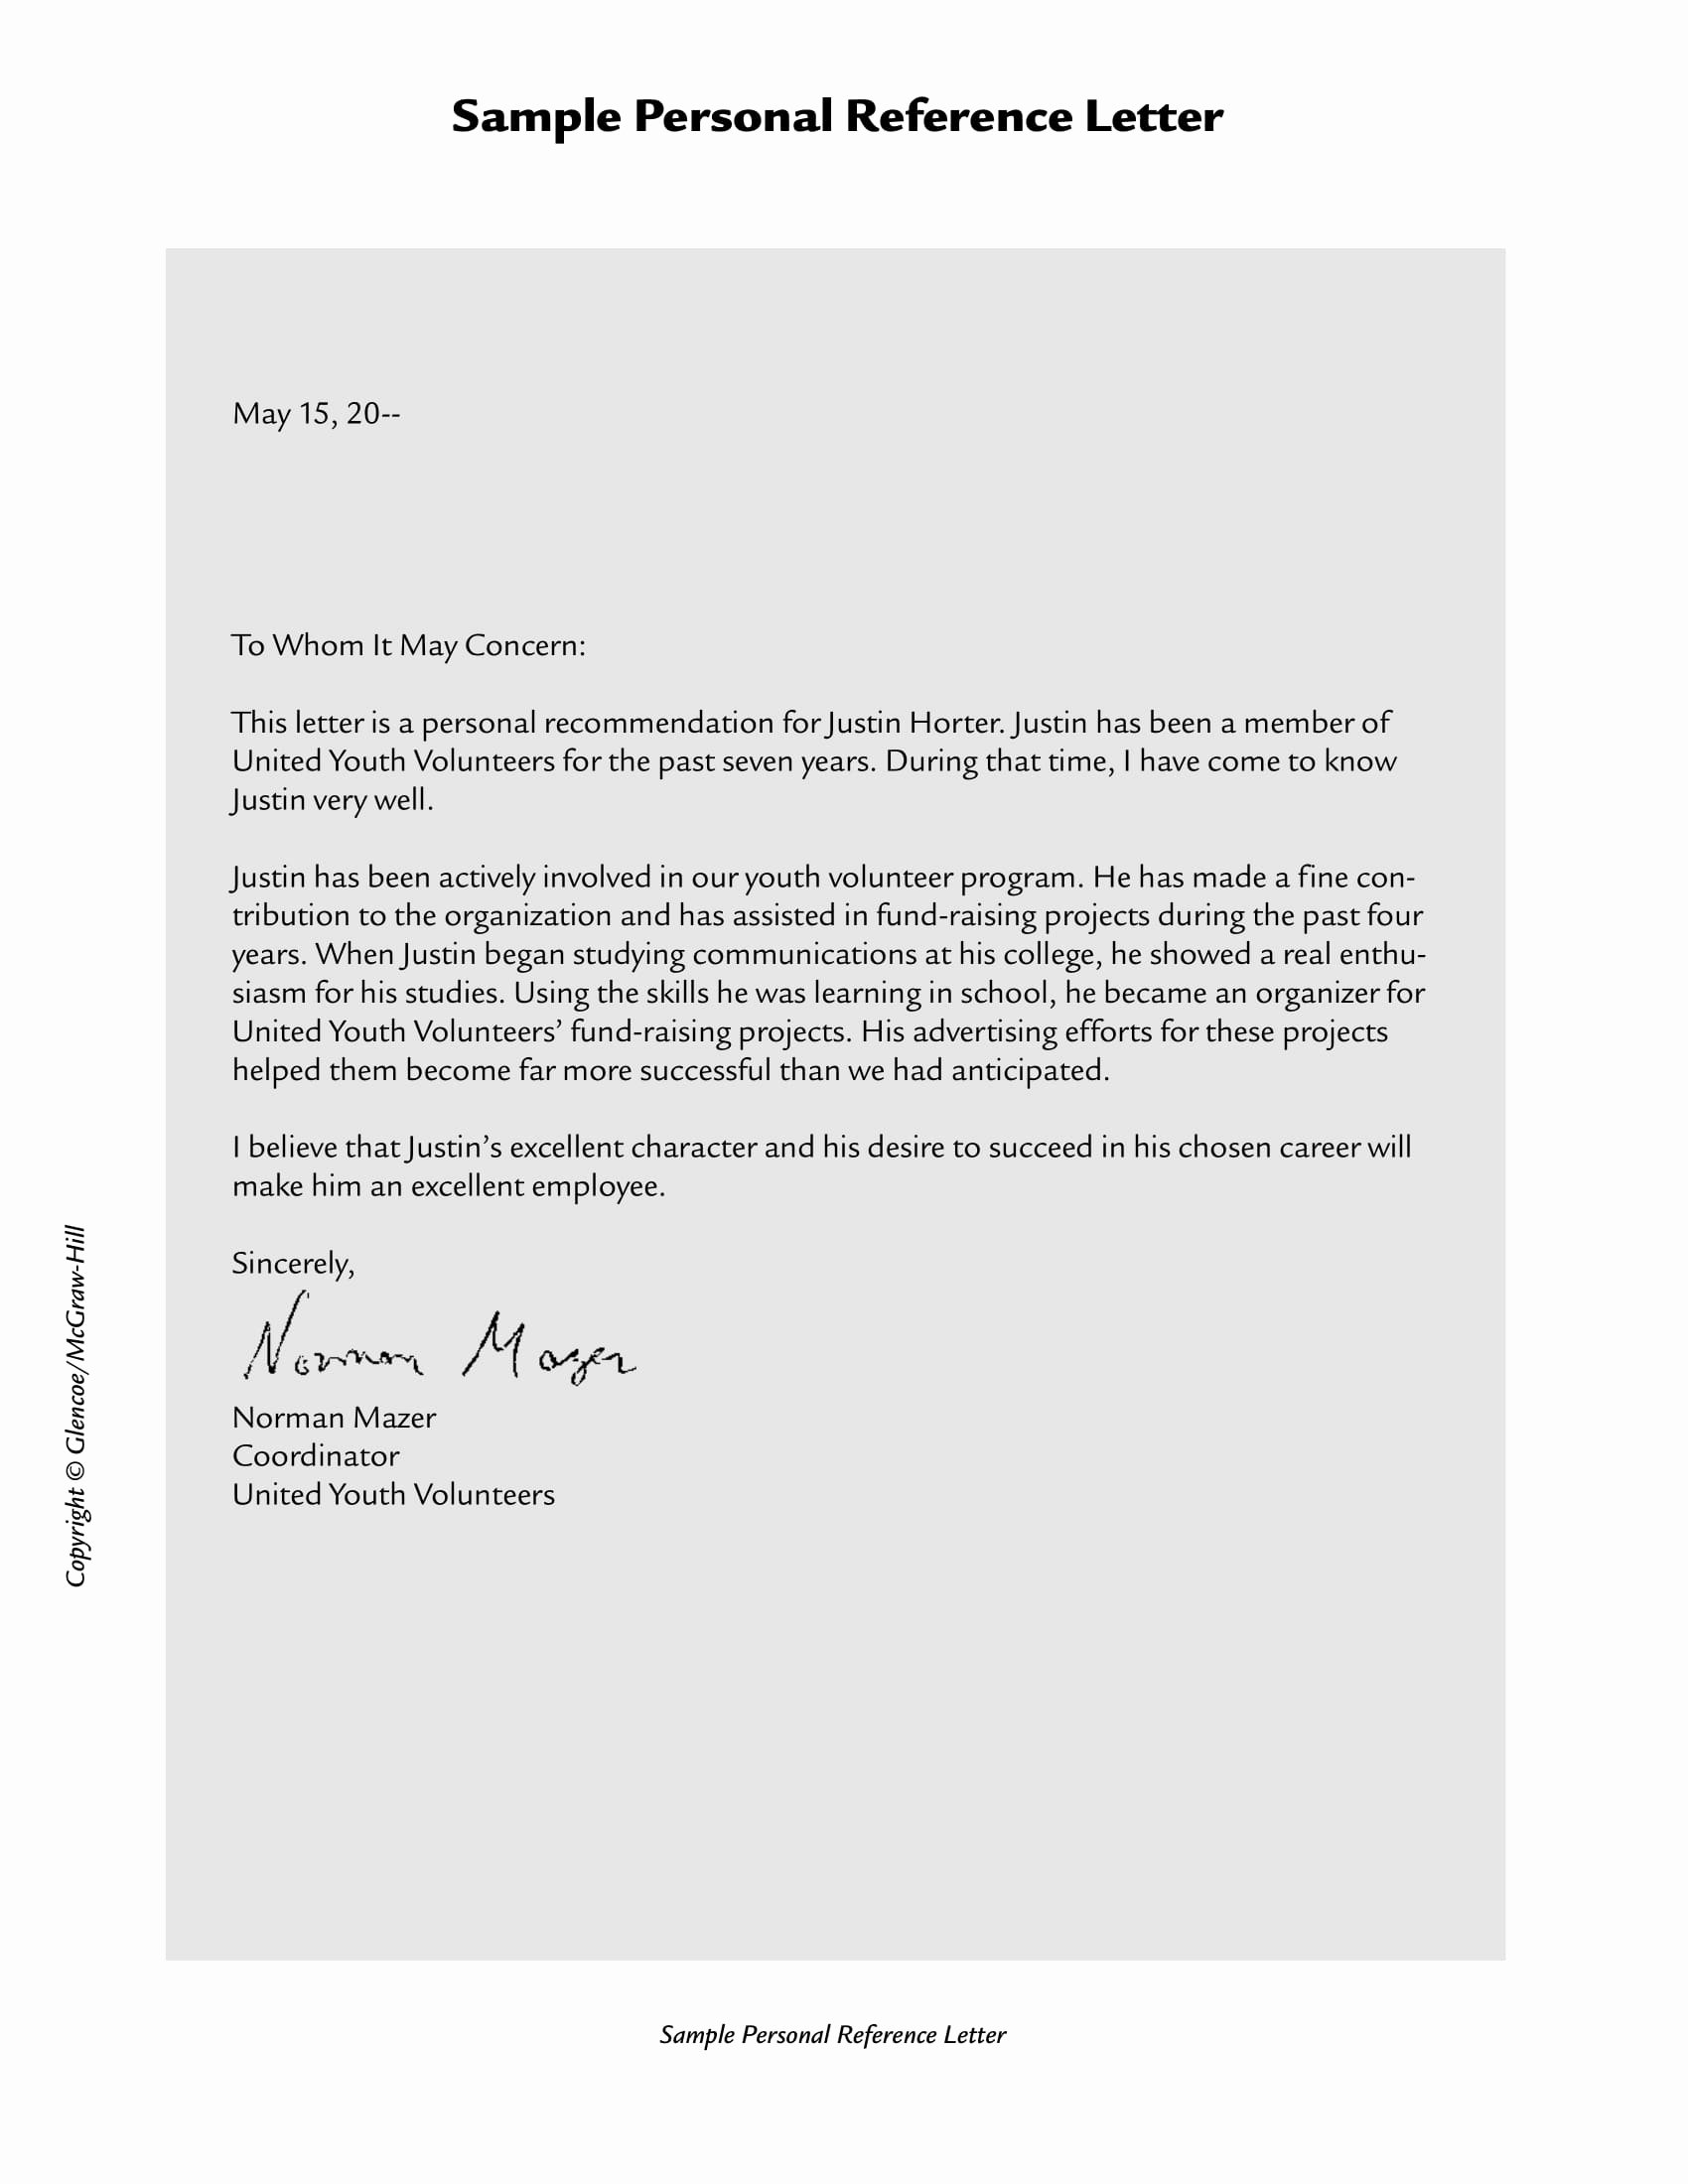 Personal Letter format Examples Inspirational 9 Personal Re Mendation Letter Examples Pdf